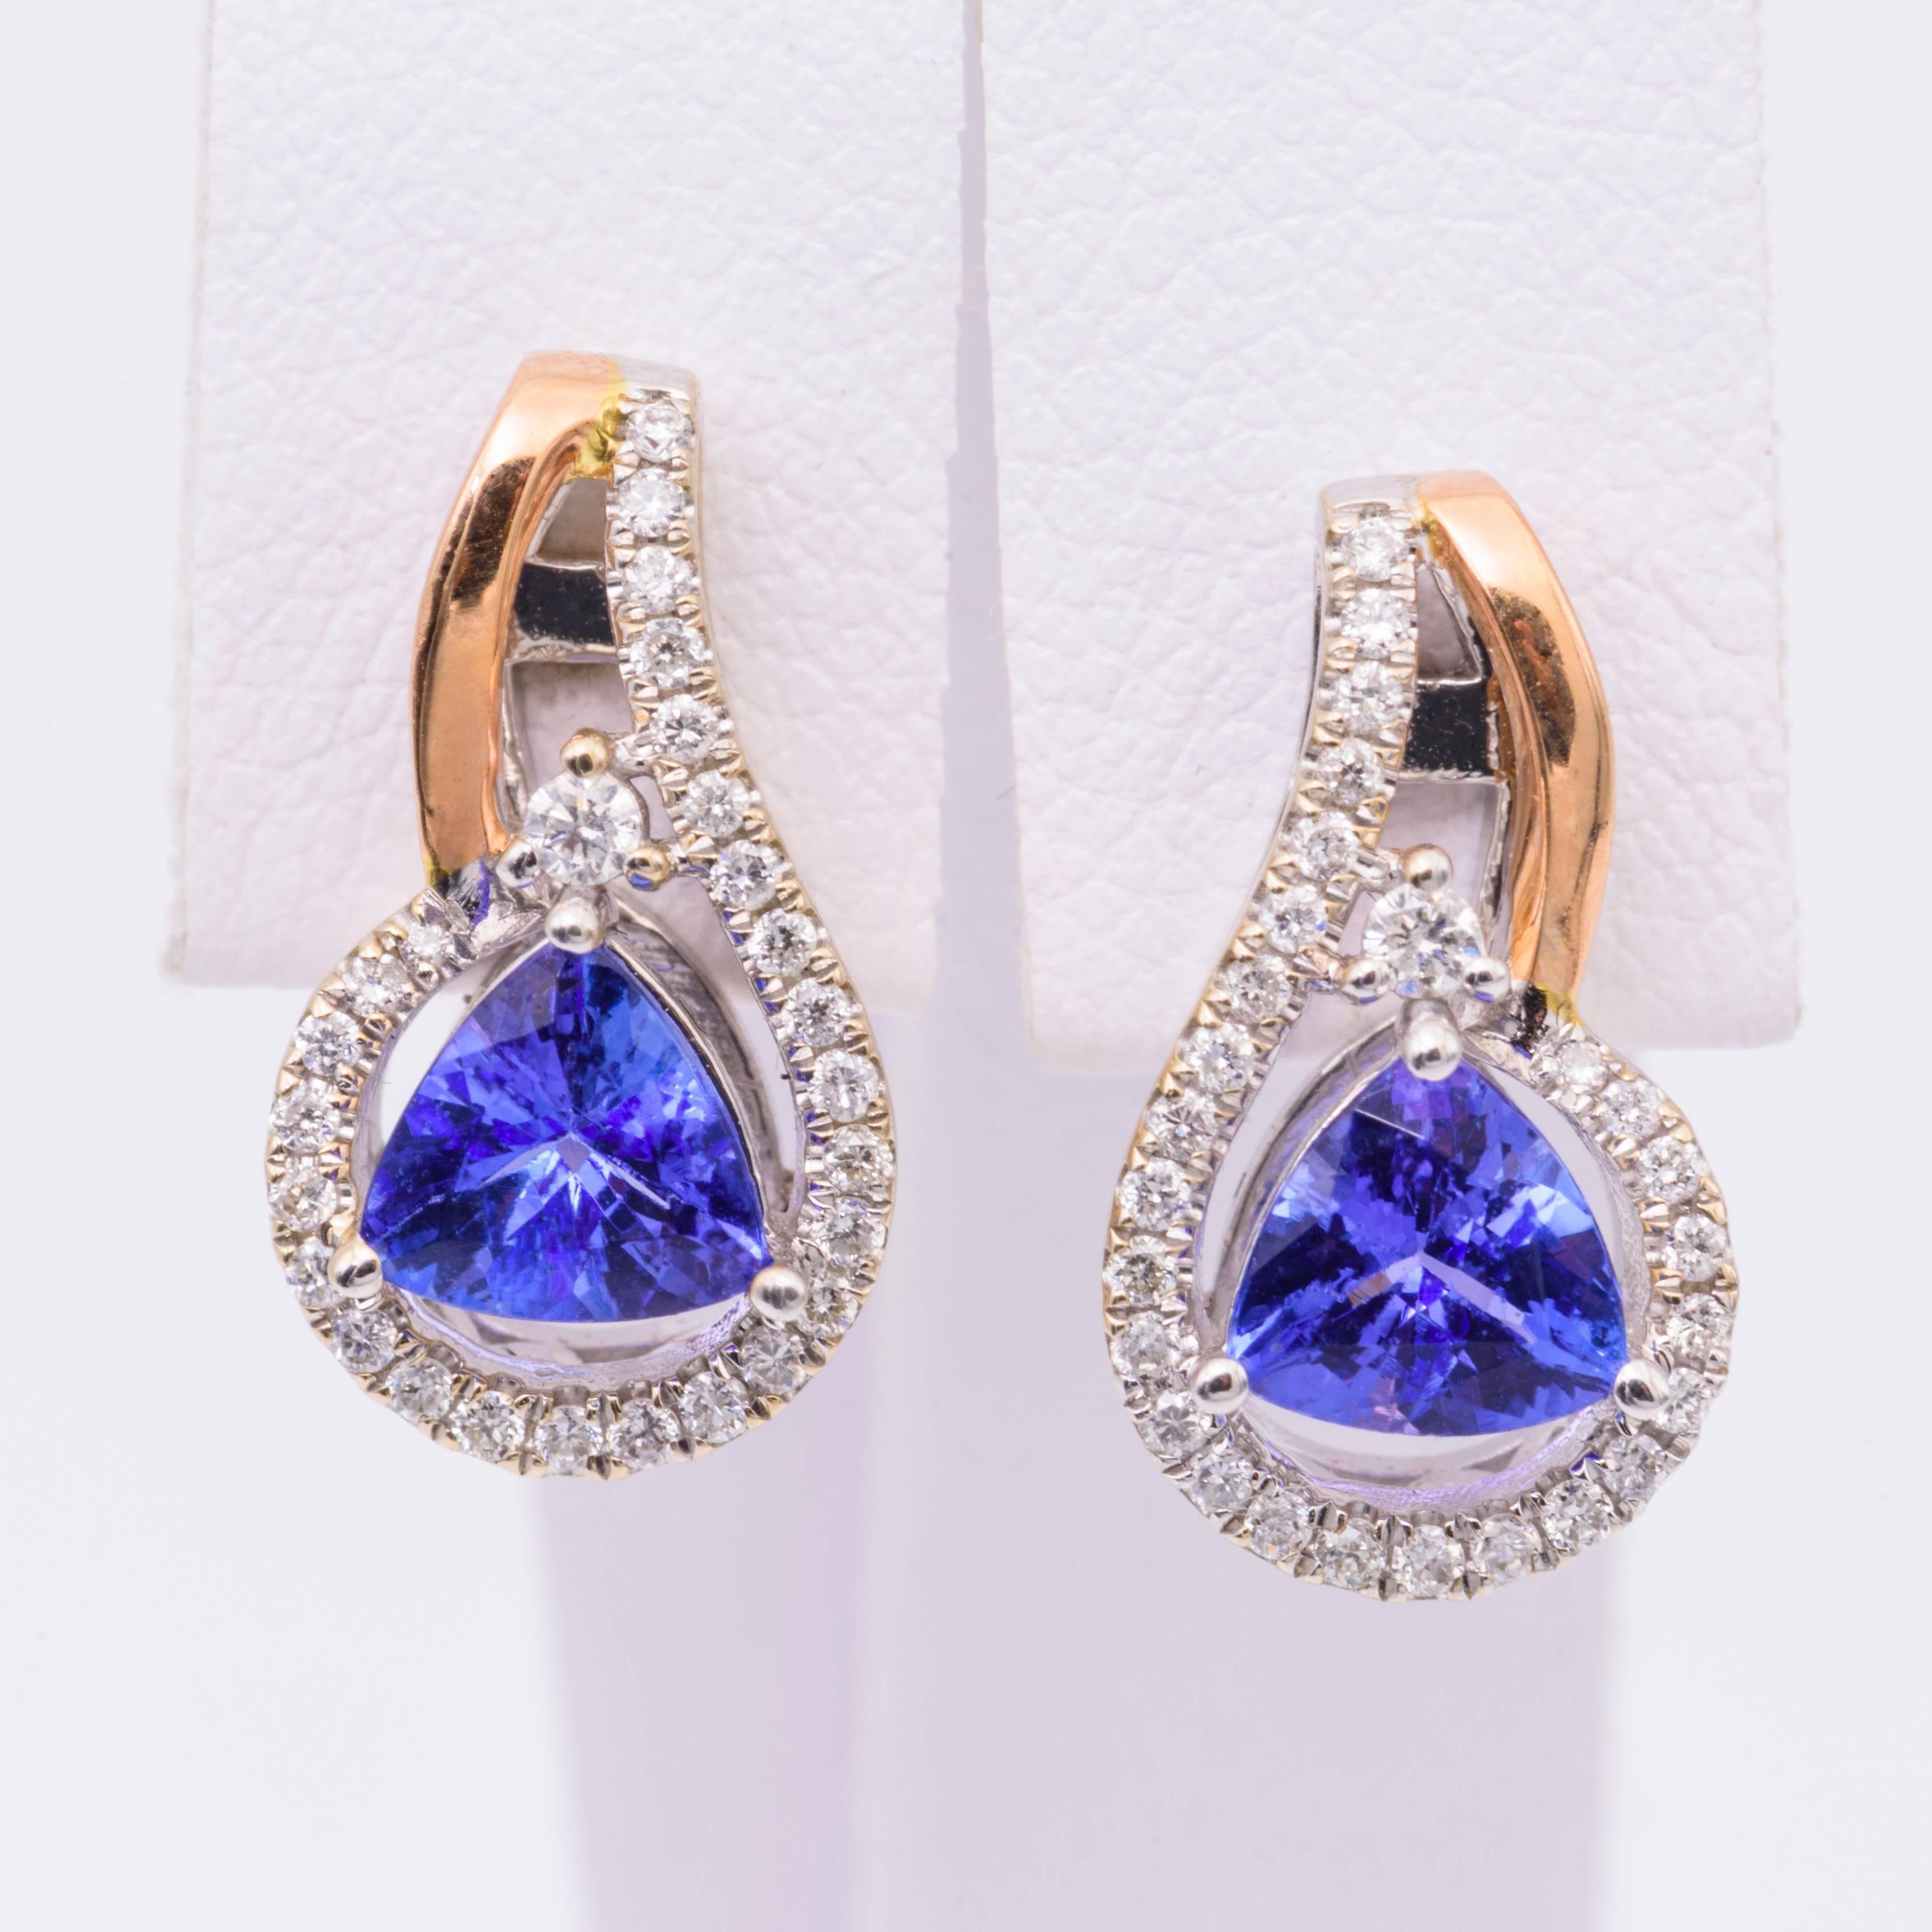 Each Tanzanite measures 5 mm for a total weight of 1.22 Carats
Diamonds: 0.24 Carats
Earrings measures 15 X 9 mm
14K white and rose gold